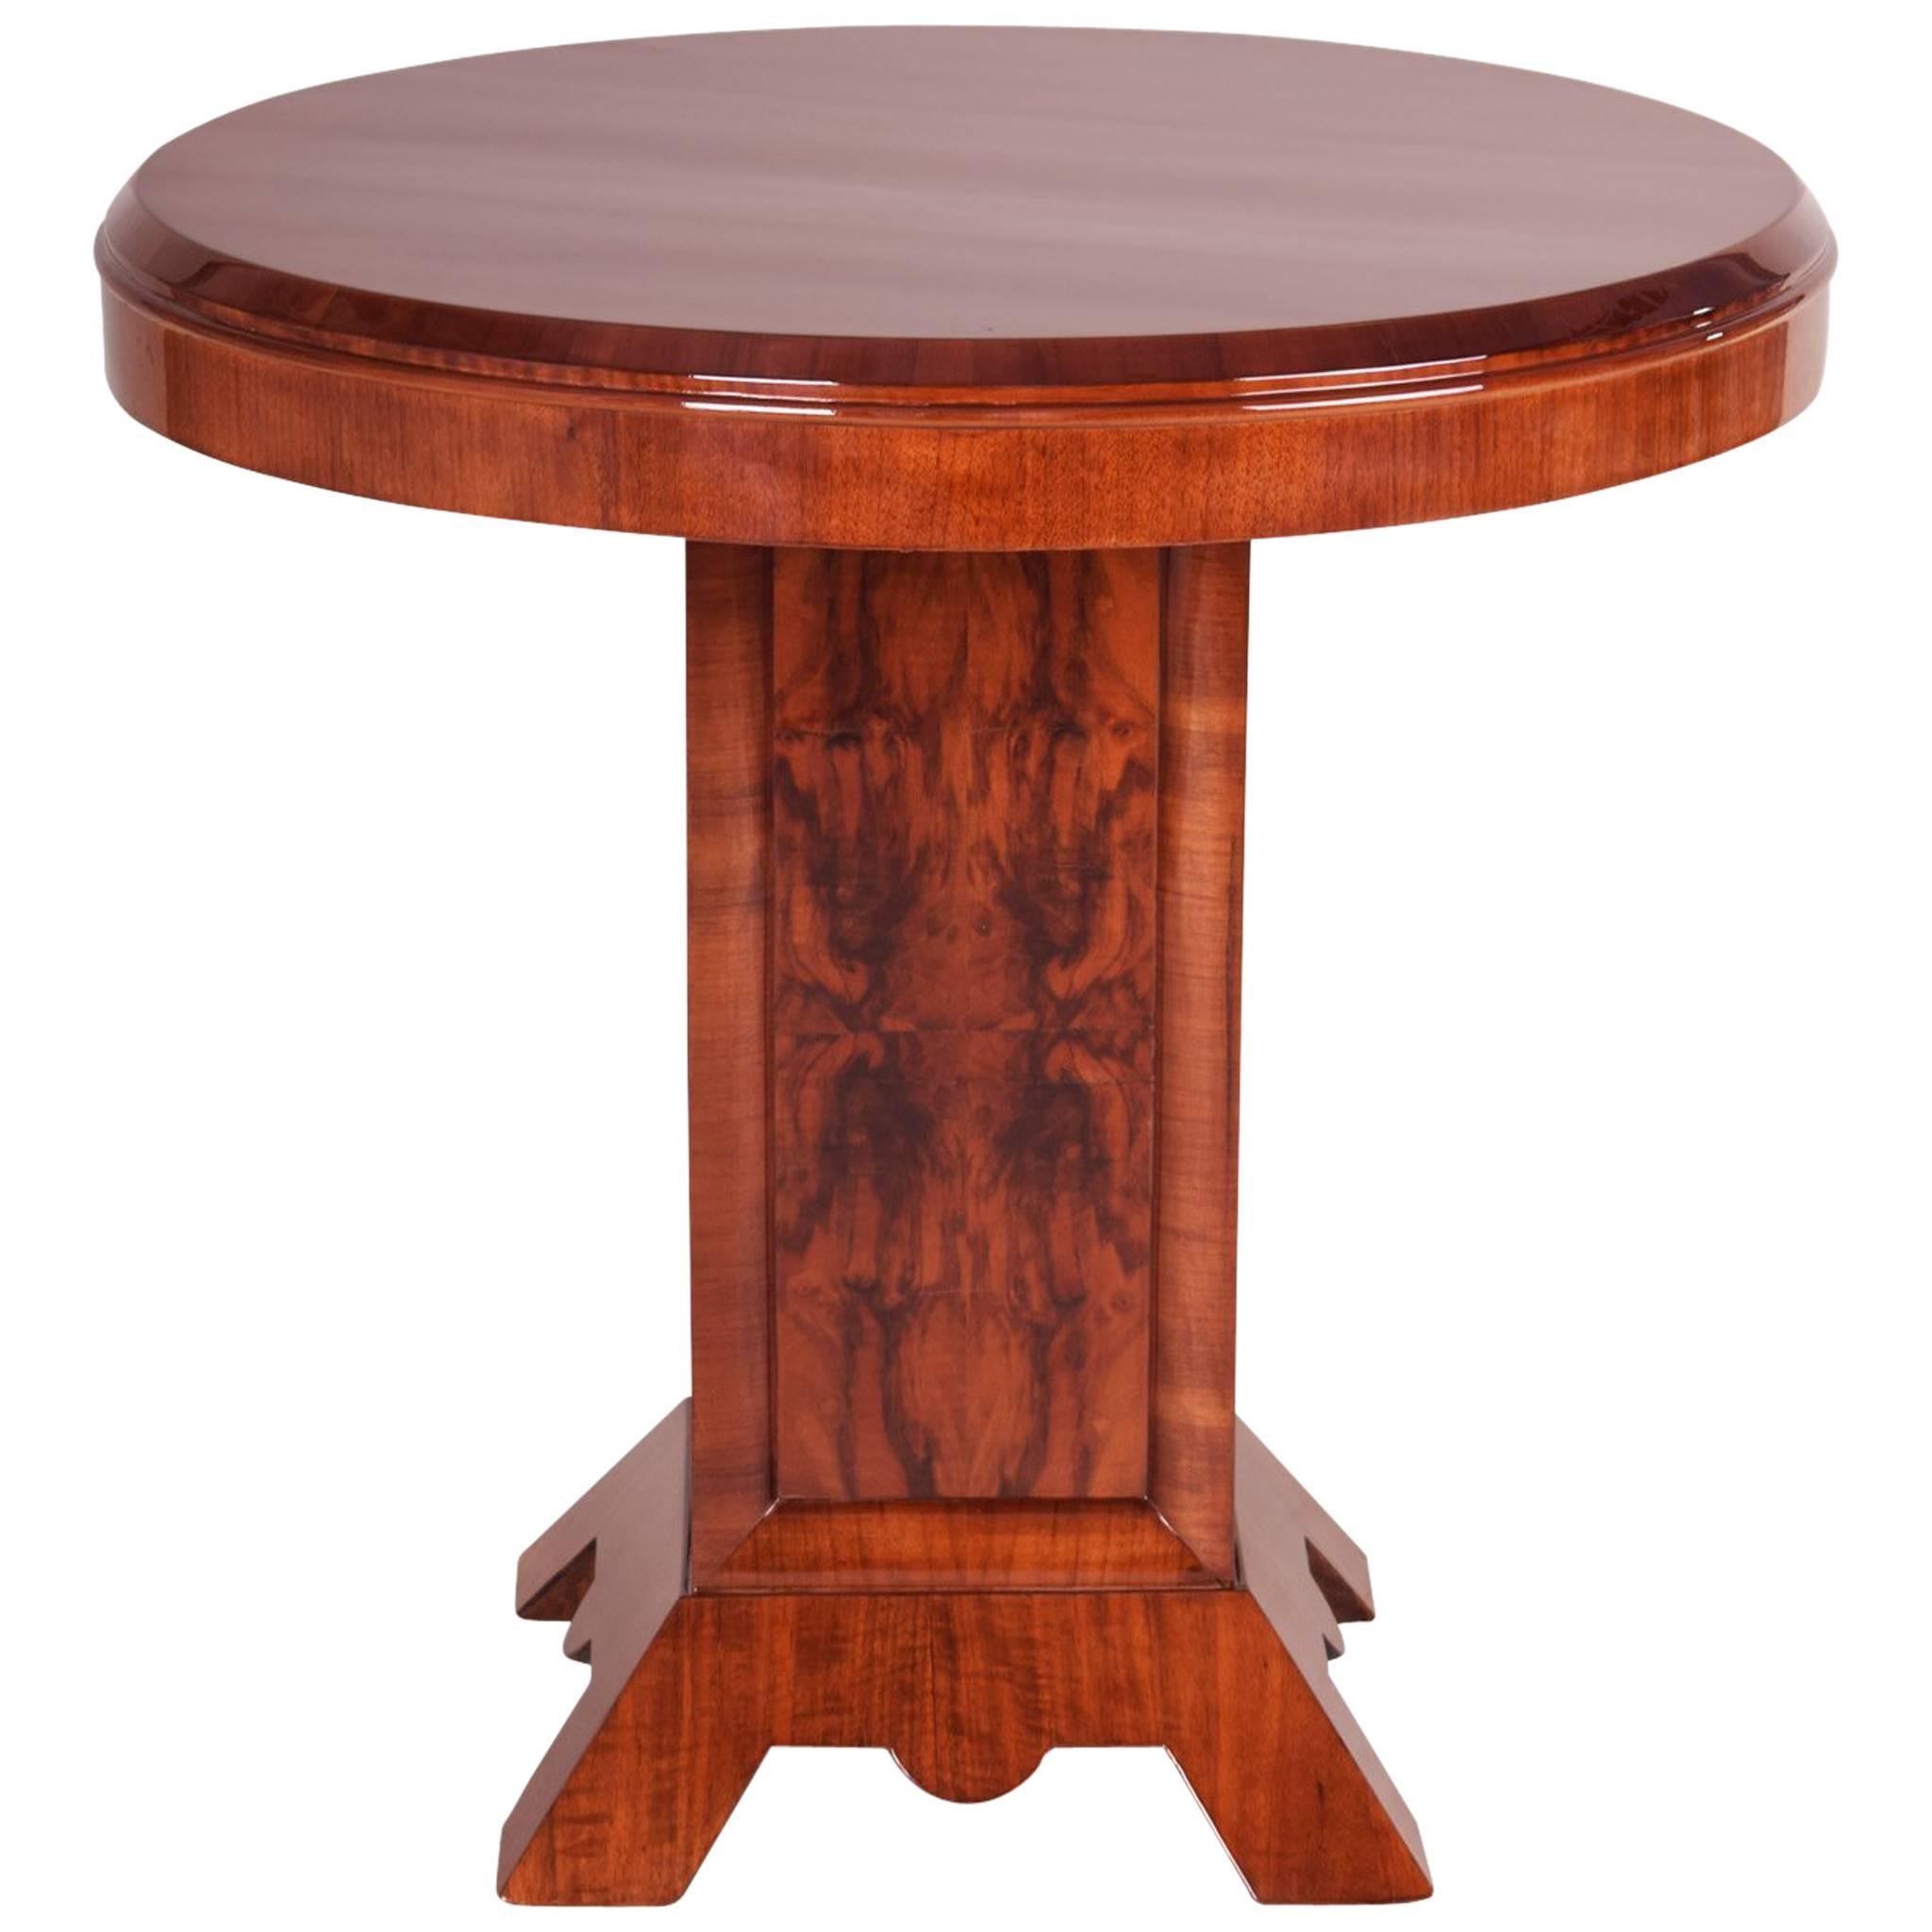 Small French Art Deco Table, Veneer is Combinated Walnut and Palisander